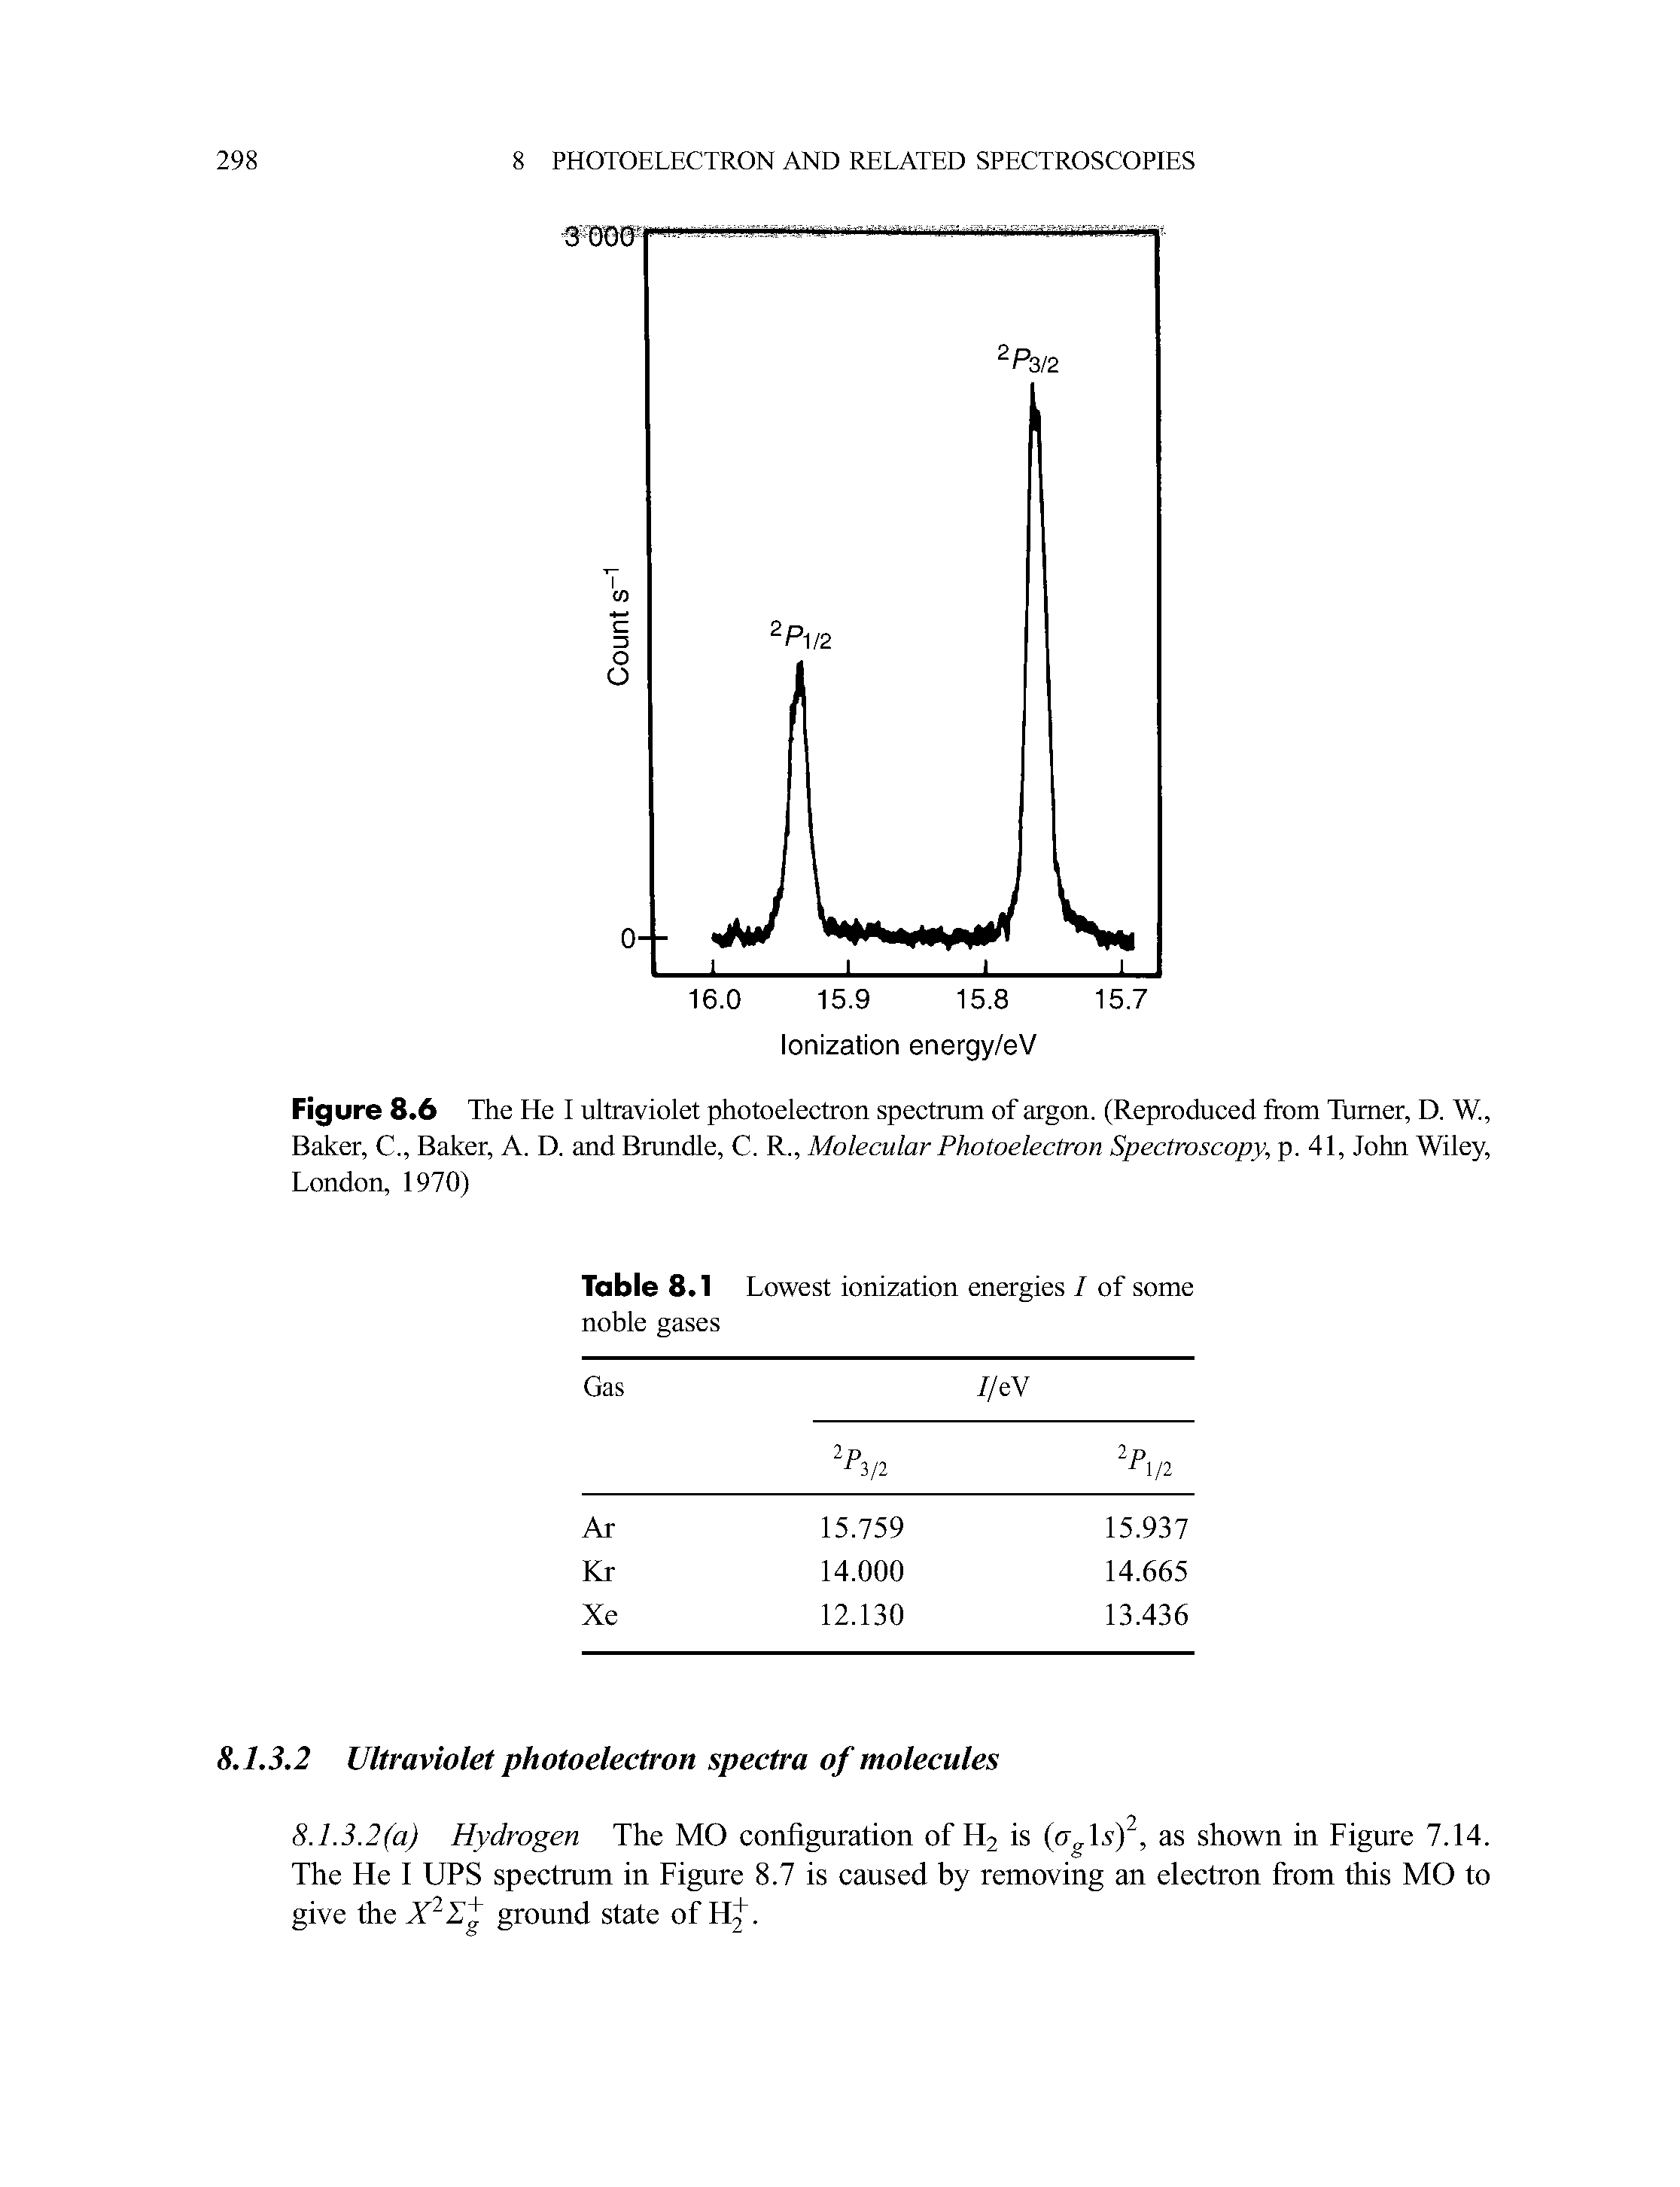 Figure 8.6 The He I ultraviolet photoelectron spectrum of argon. (Reproduced from Turner, D. W., Baker, C., Baker, A. D. and Brundle, C. R., Molecular Photoelectron Spectroscopy, p. 41, John Wiley, London, 1970)...